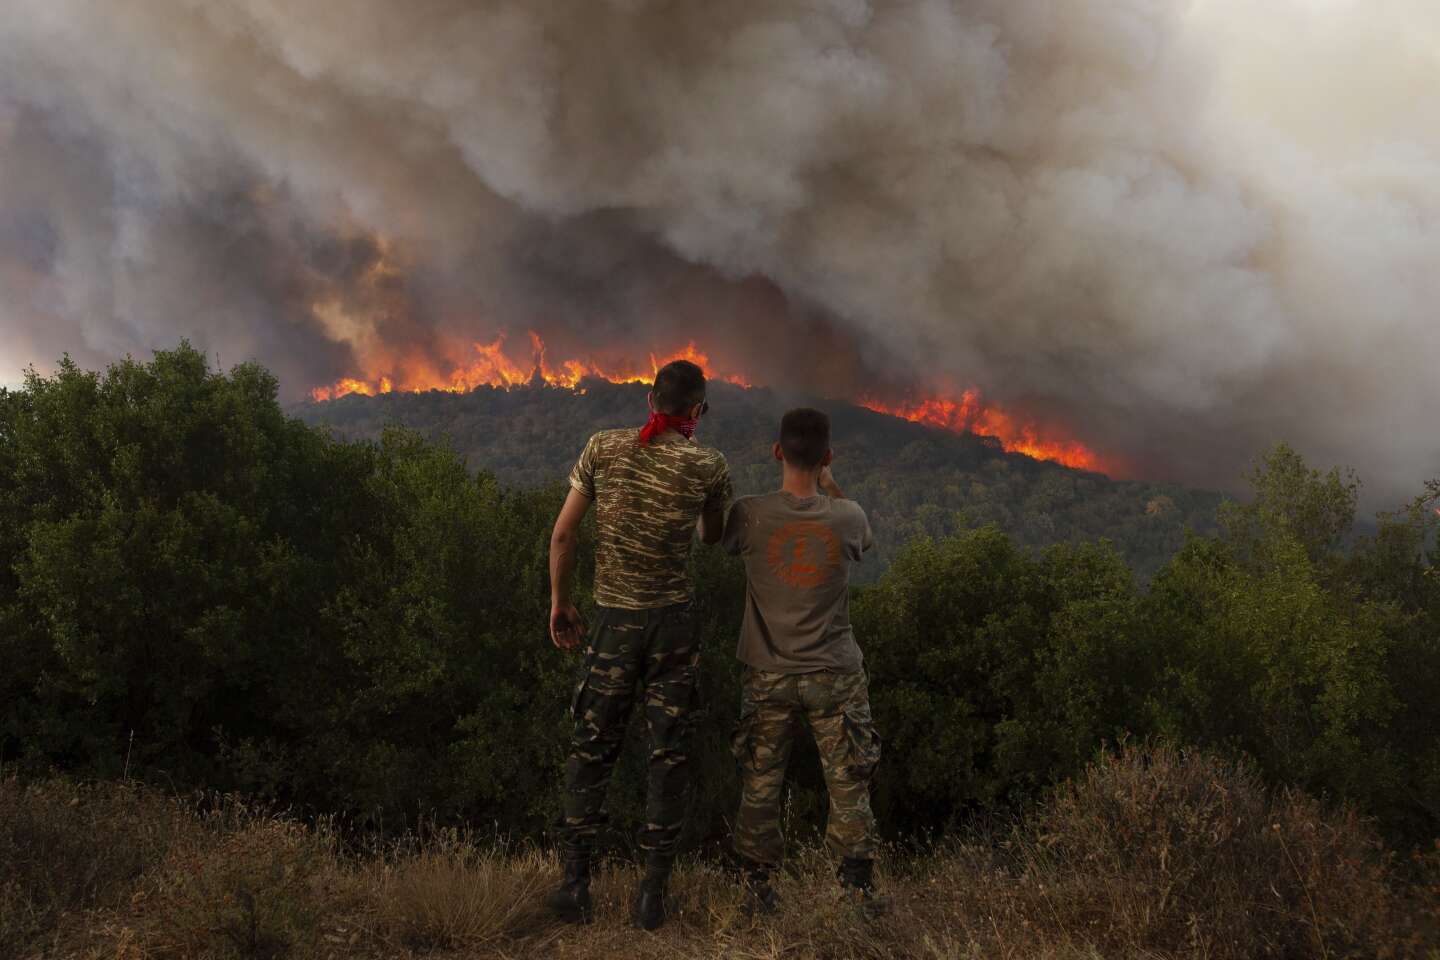 Fires in Greece will destroy more than 1,500 square kilometers of land, PM laments